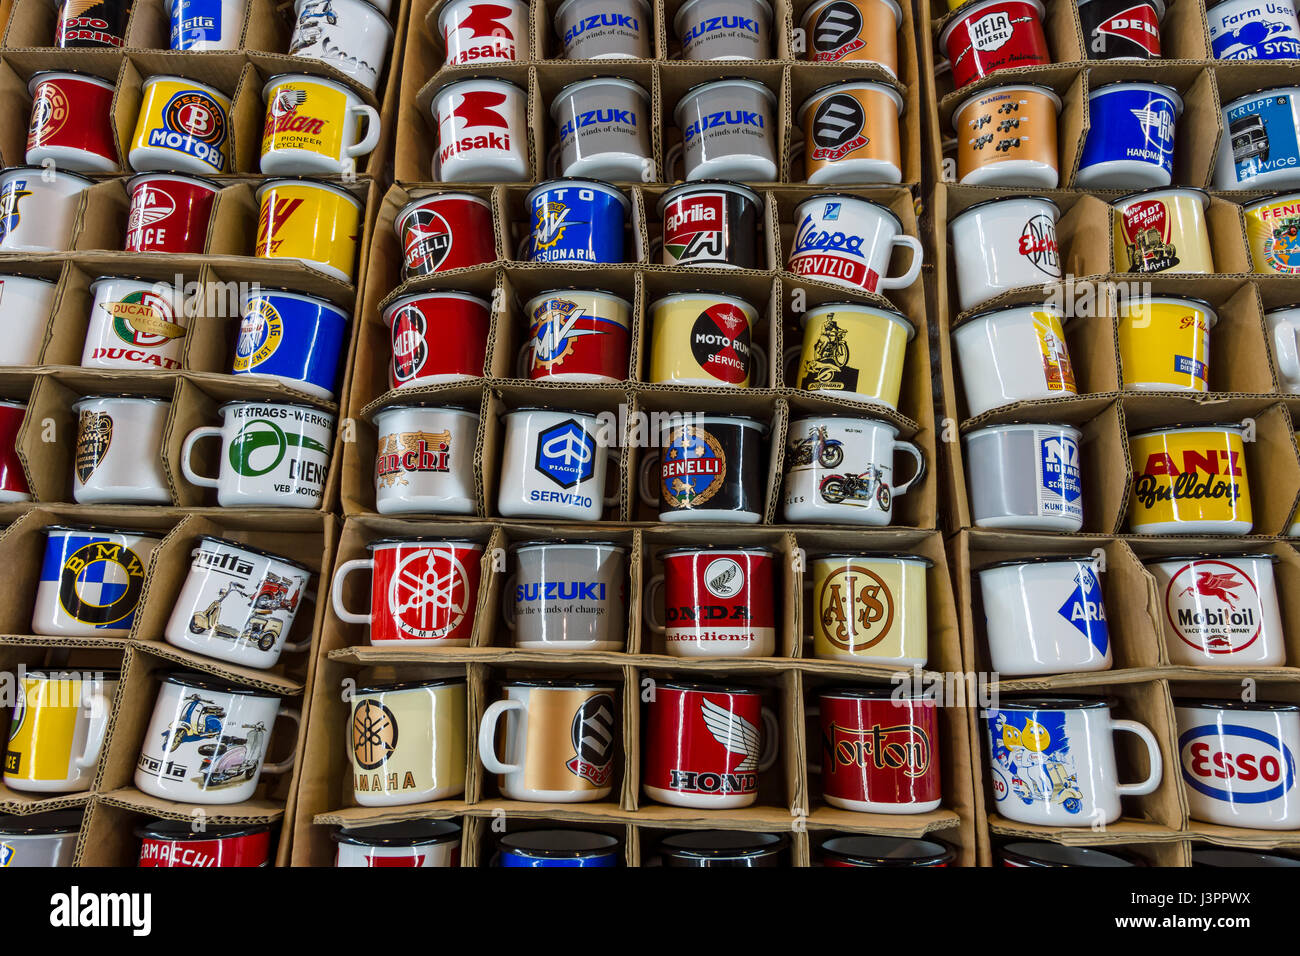 STUTTGART, GERMANY - MARCH 03, 2017: Souvenir mugs with logos of famous automotive brands, oil companies and beverage producers. Europe's greatest classic car exhibition 'RETRO CLASSICS' Stock Photo